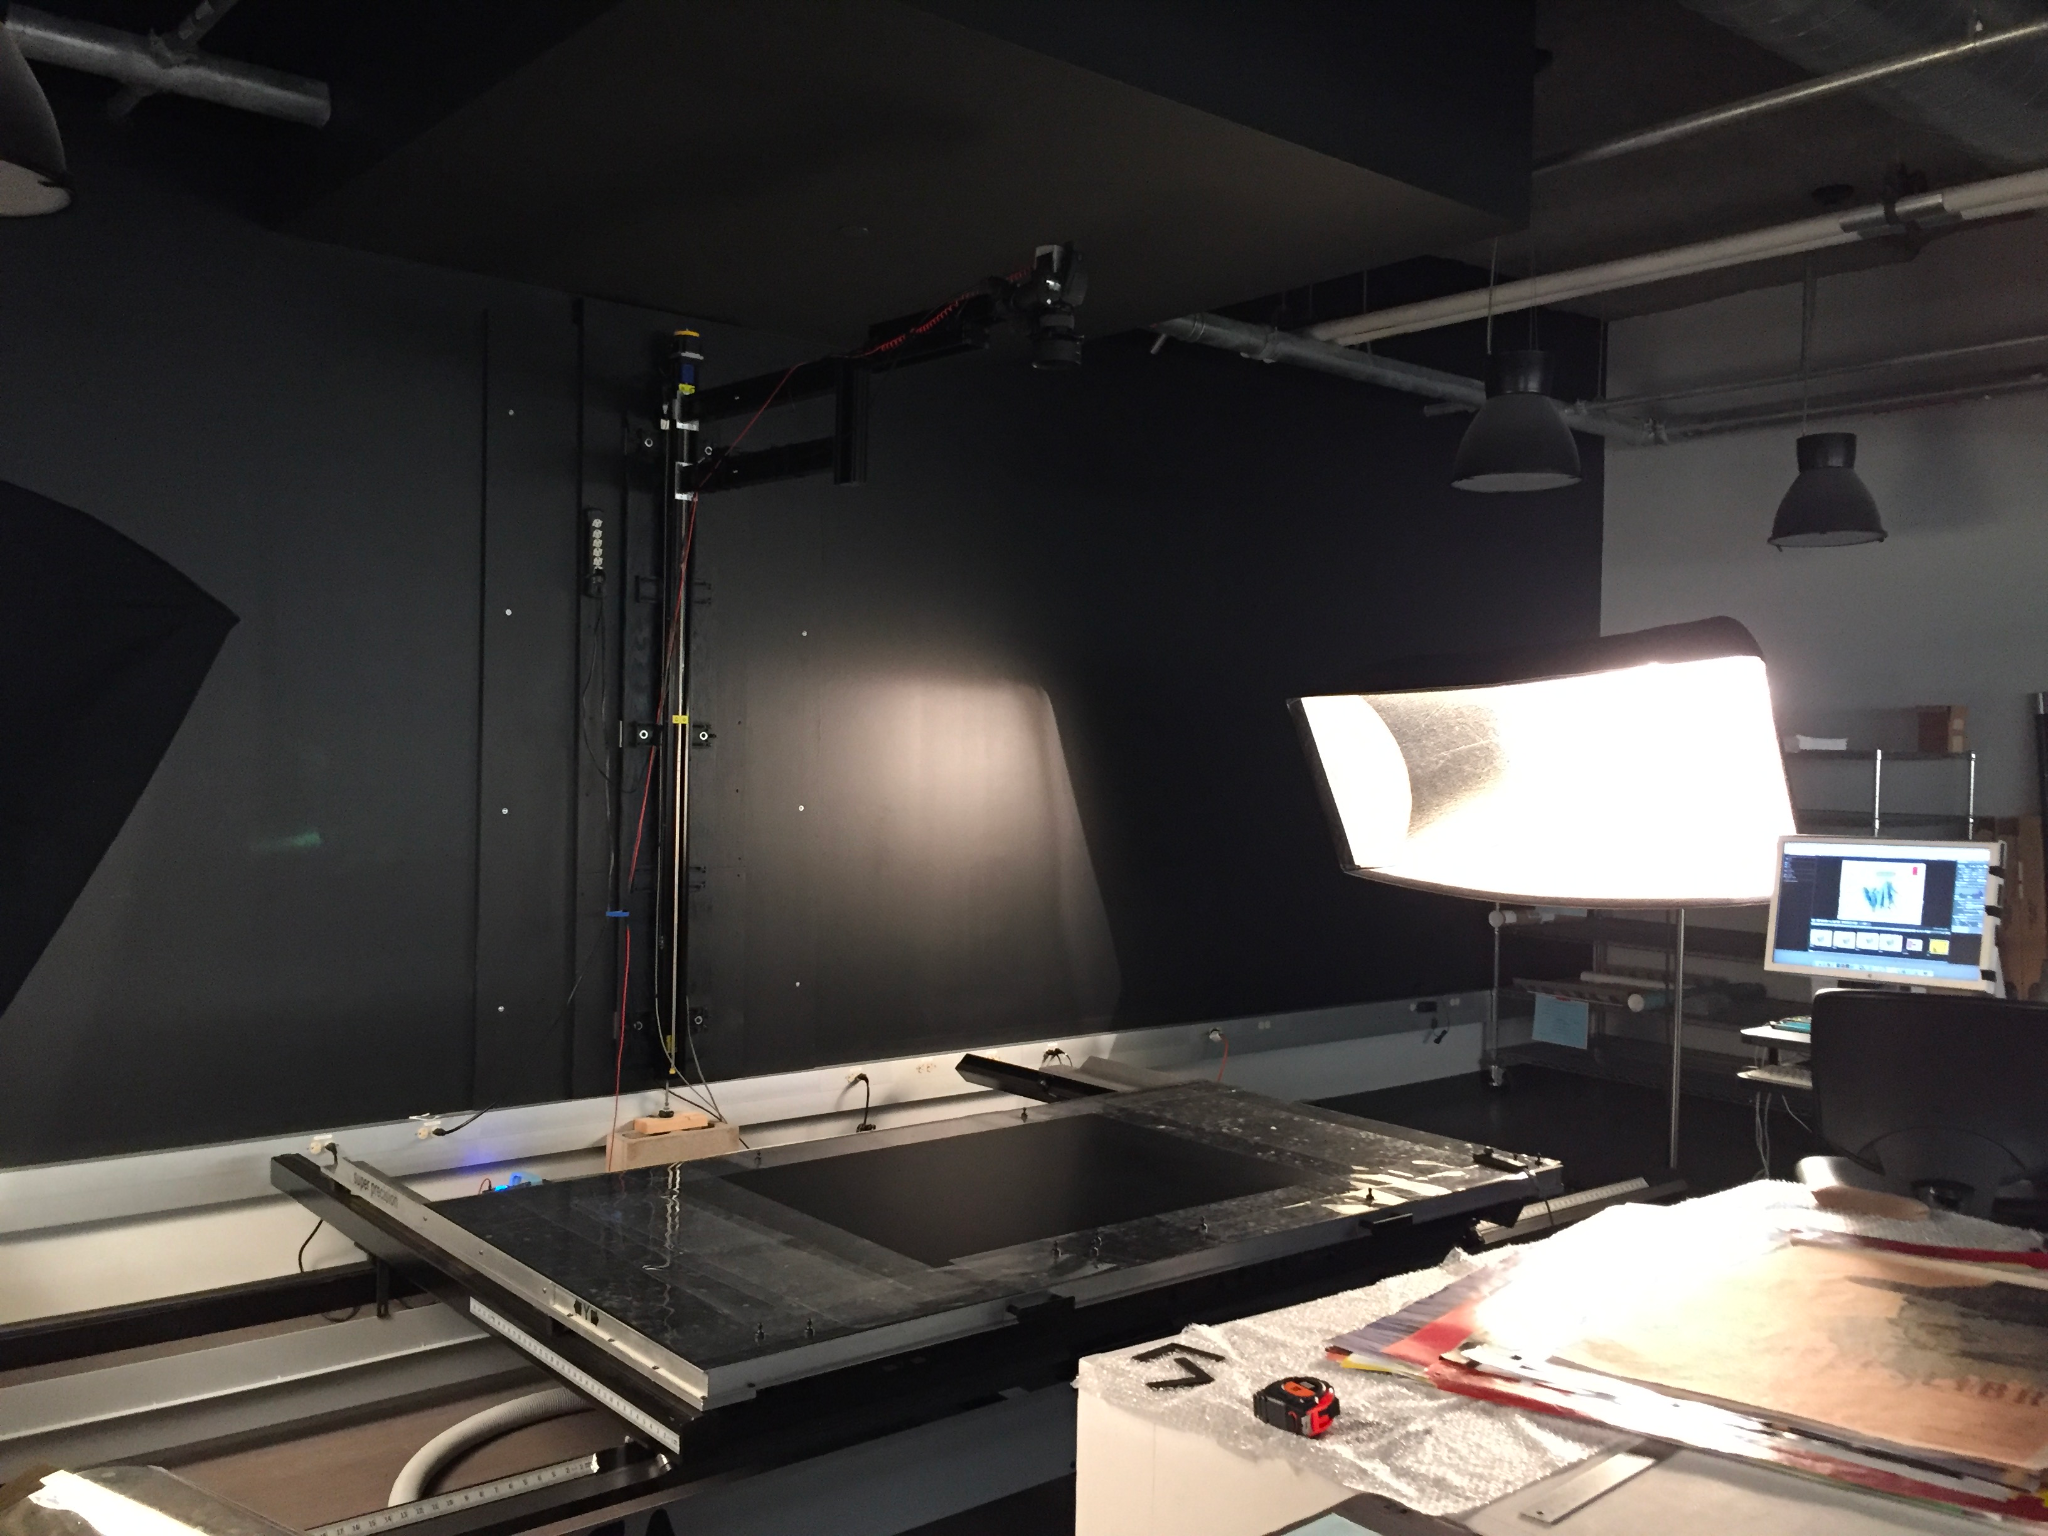 The journey towards Atlascope begins in the digitization lab, where the physical items in our collection are scanned and transformed into digital versions available online.